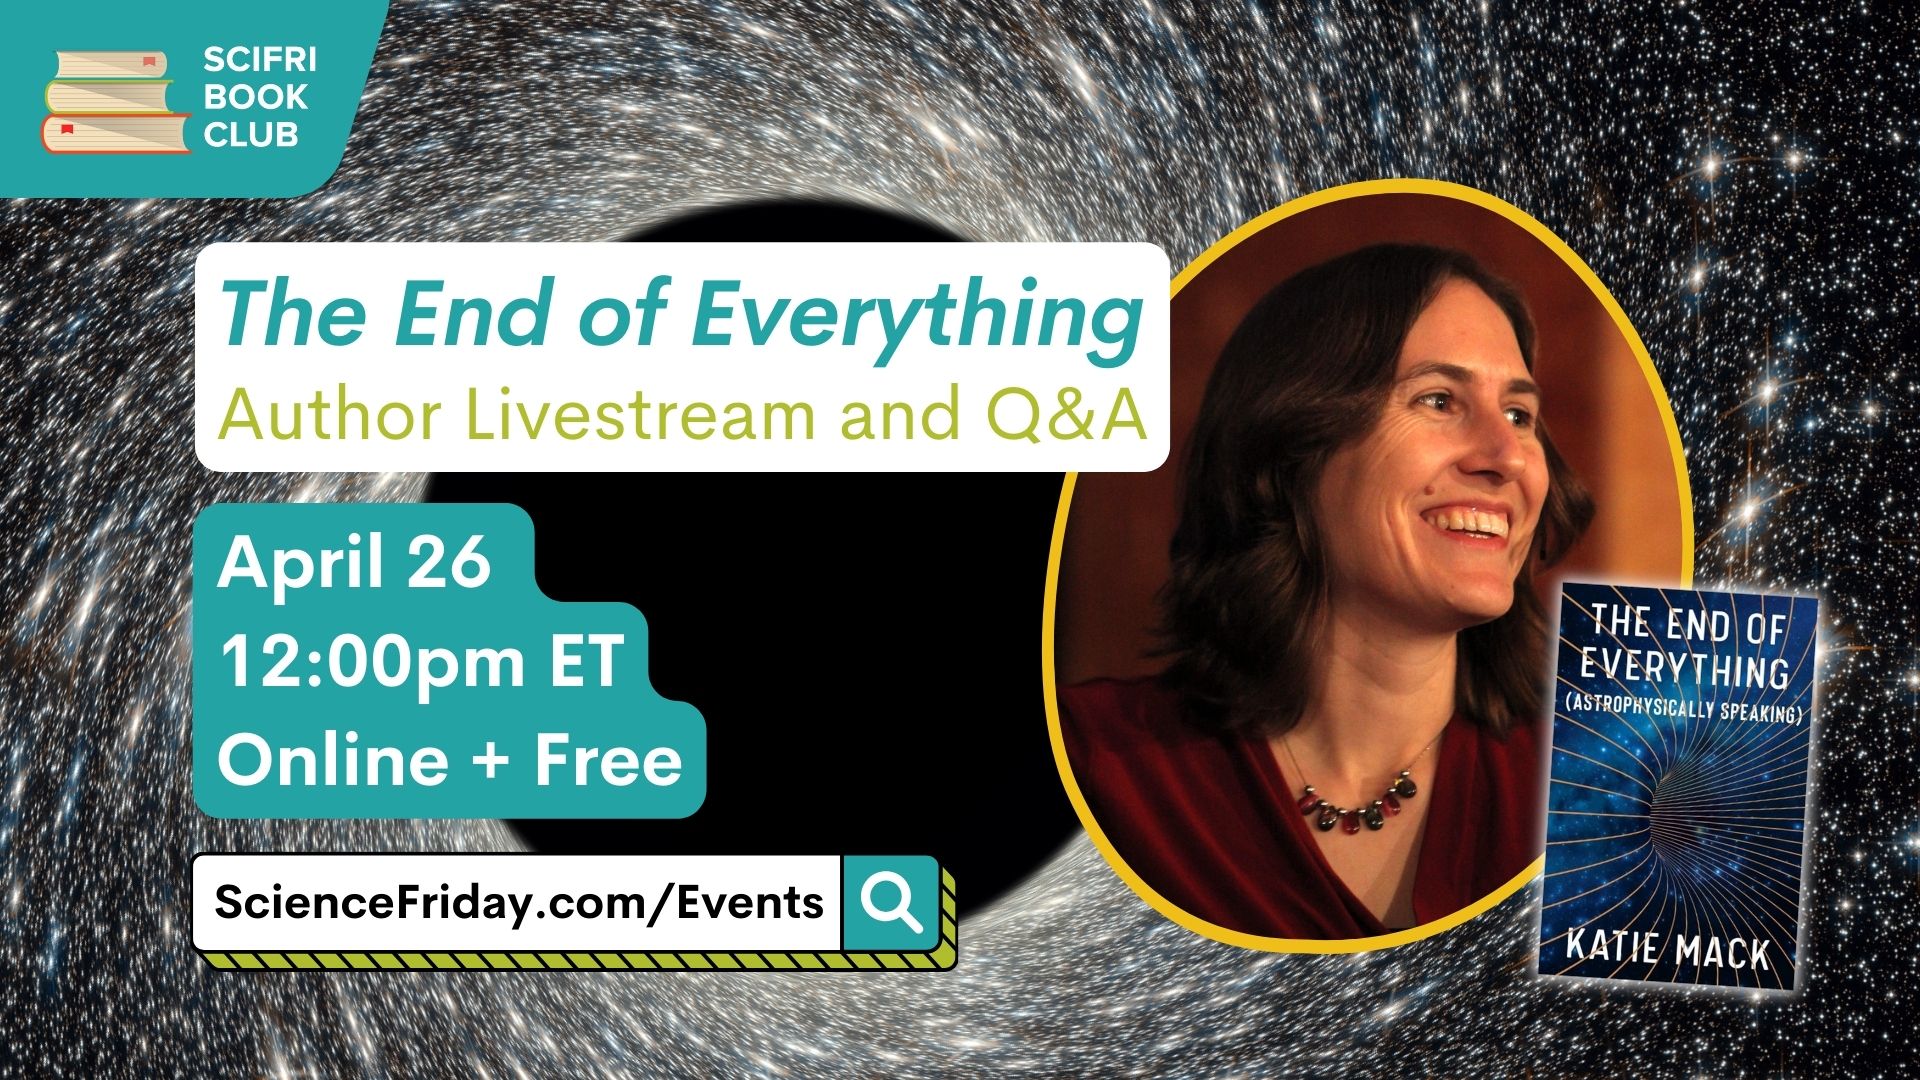 Event promotional image. In the top left corner, SciFri Book Club logo, with event info below, which reads: "The End of Everything: Author Livestream and Q&A. April 26, 12:00pm ET, Online + Free, ScienceFriday.com/Events." The middle features the book cover of THE END OF EVERYTHING, and headshot the author, a white woman smiling and looking to the right. The background is an image of a starry sky swirling towards a black hole in the middle.